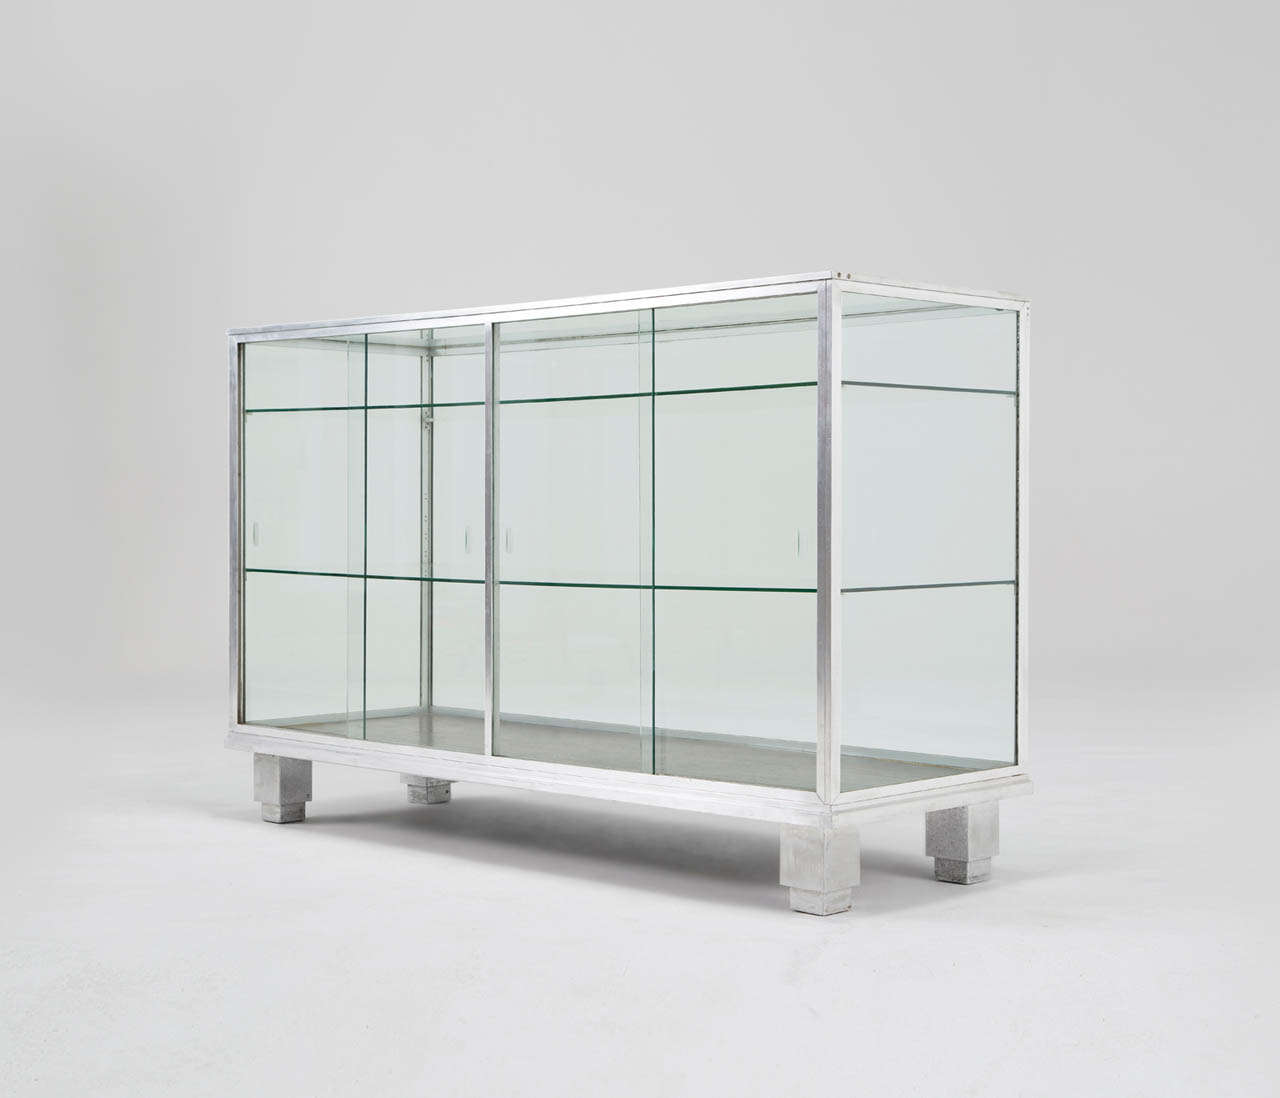 Vitrine, aluminum, glass, France, 1940s.

Equipped with cubistic shaped legs, sliding doors and several glass shelves.
Nice patina to the aluminum, can be completely polished if preferred.

Free shipping for all European destinations and discounted